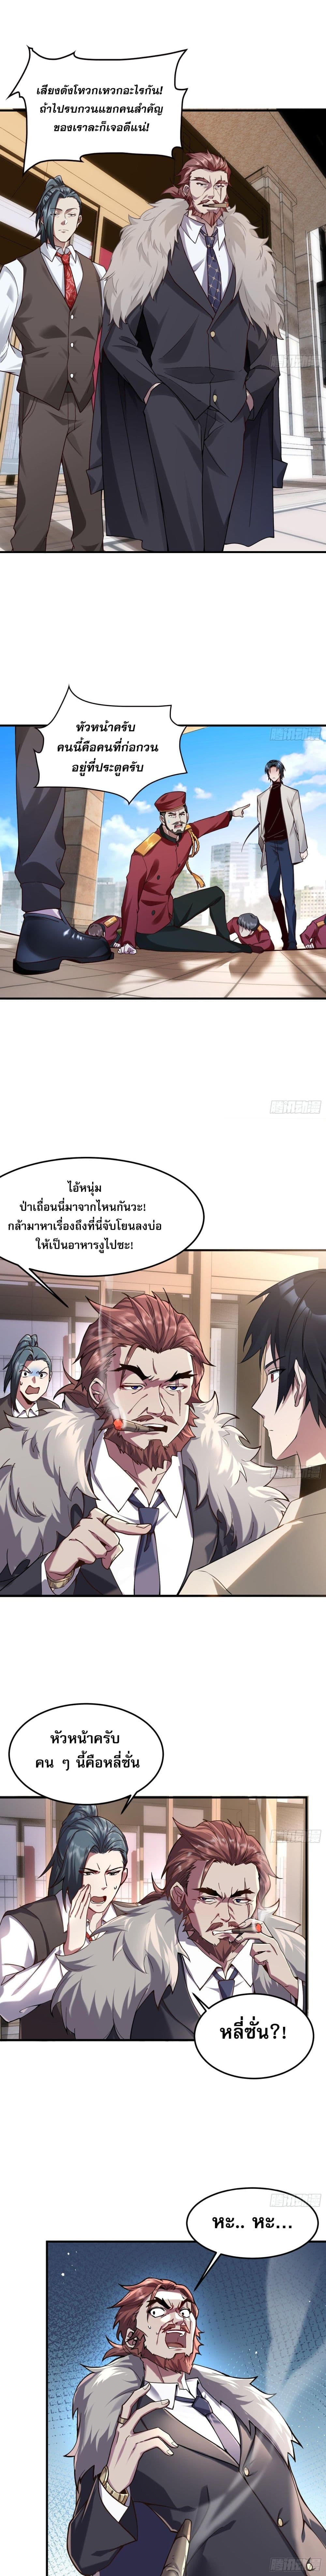 The All-Knowing Cultivator ผู้ฝึกตนผู้รอบรู้ 8/10